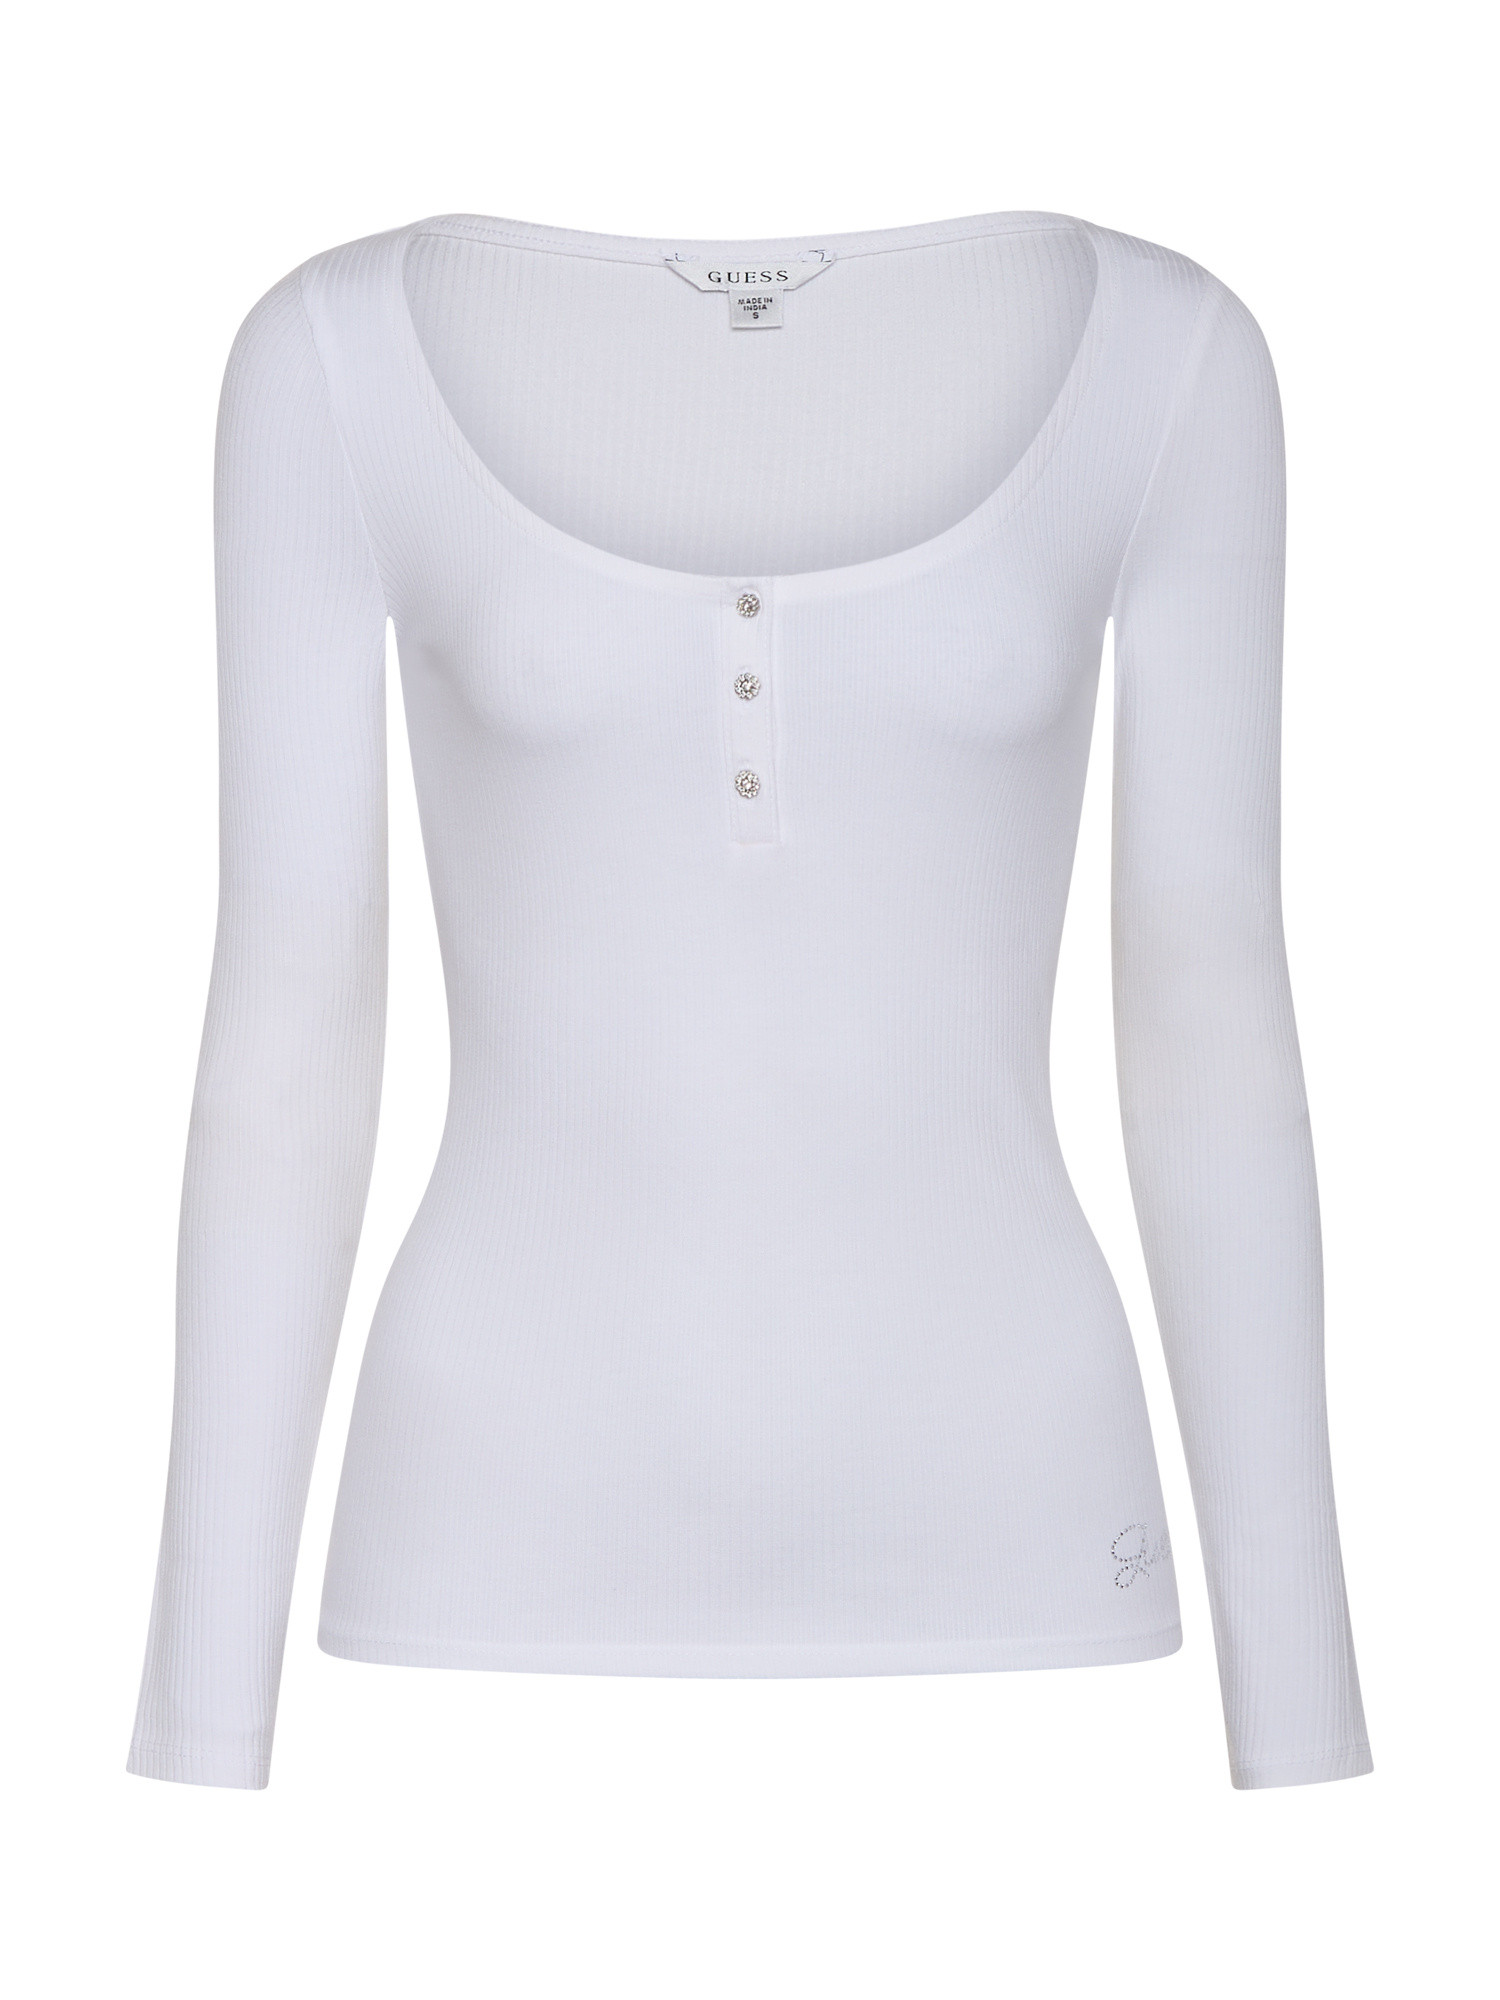 Guess - T-shirt with buttons, White, large image number 0